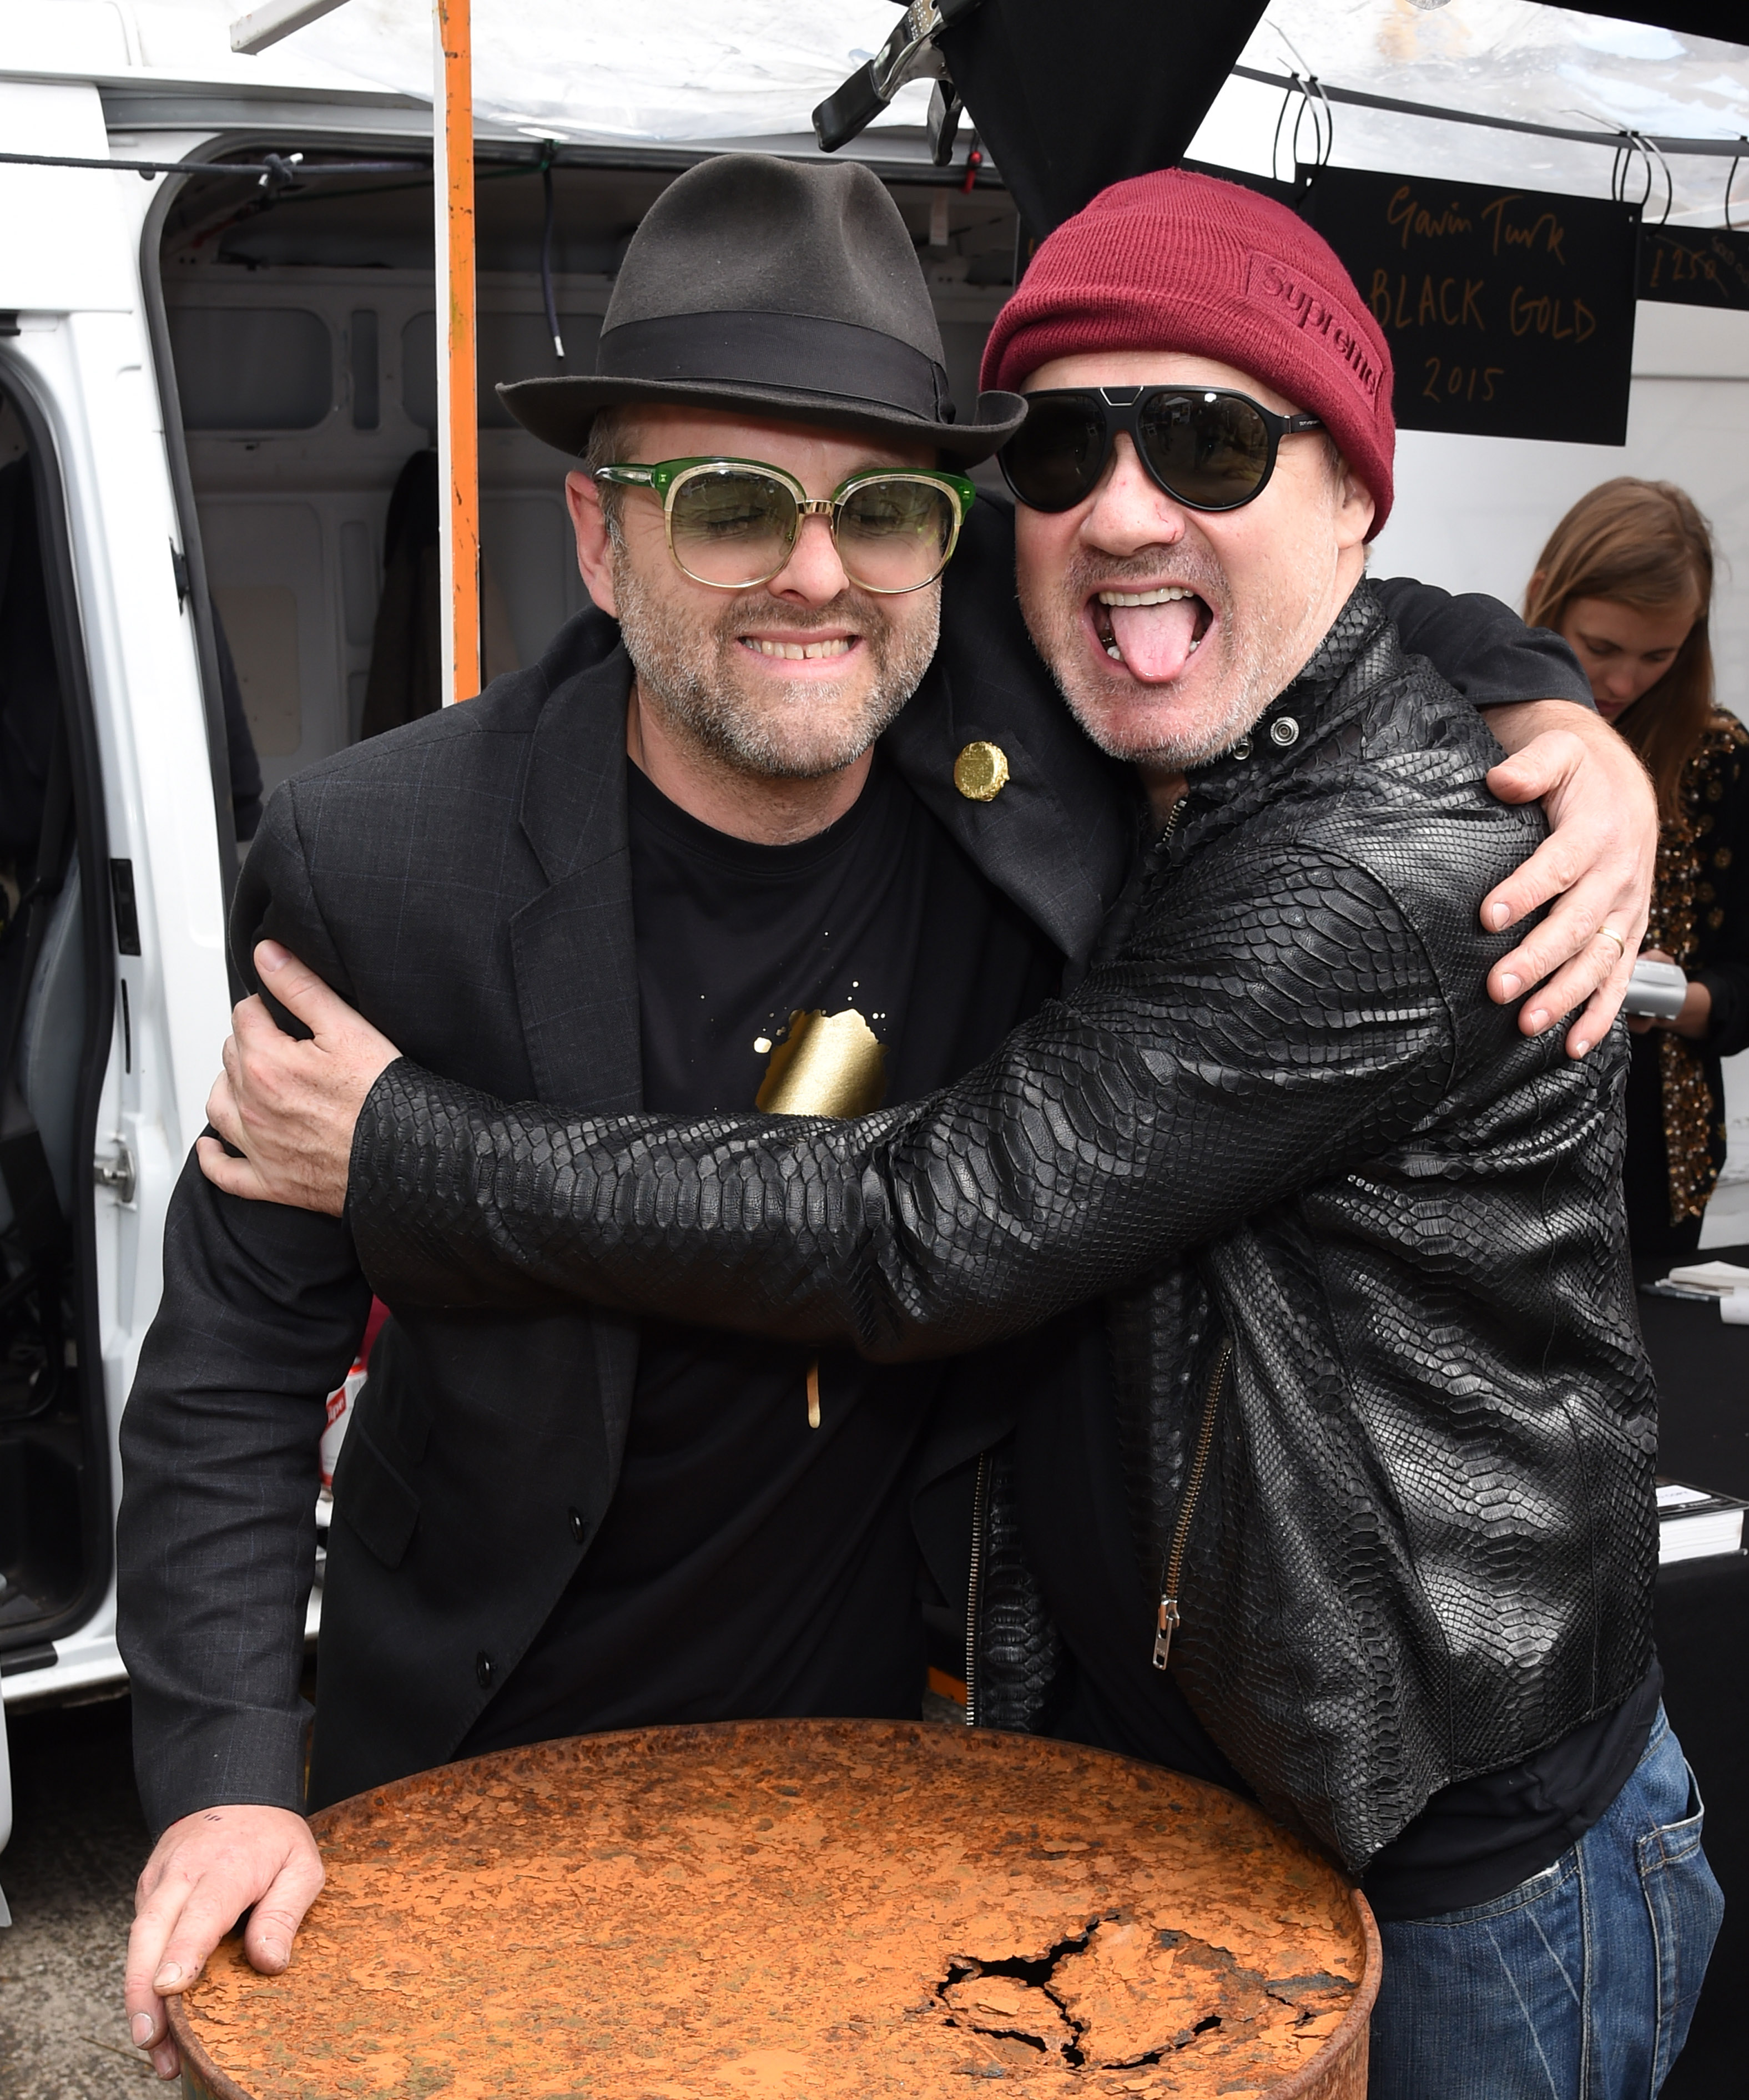 Gavin Turk (Left) and Damien Hirst at the Vauxhall Art Car Boot Fair 2015 on Sunday 14th June 2015 Photo by Dave Benett